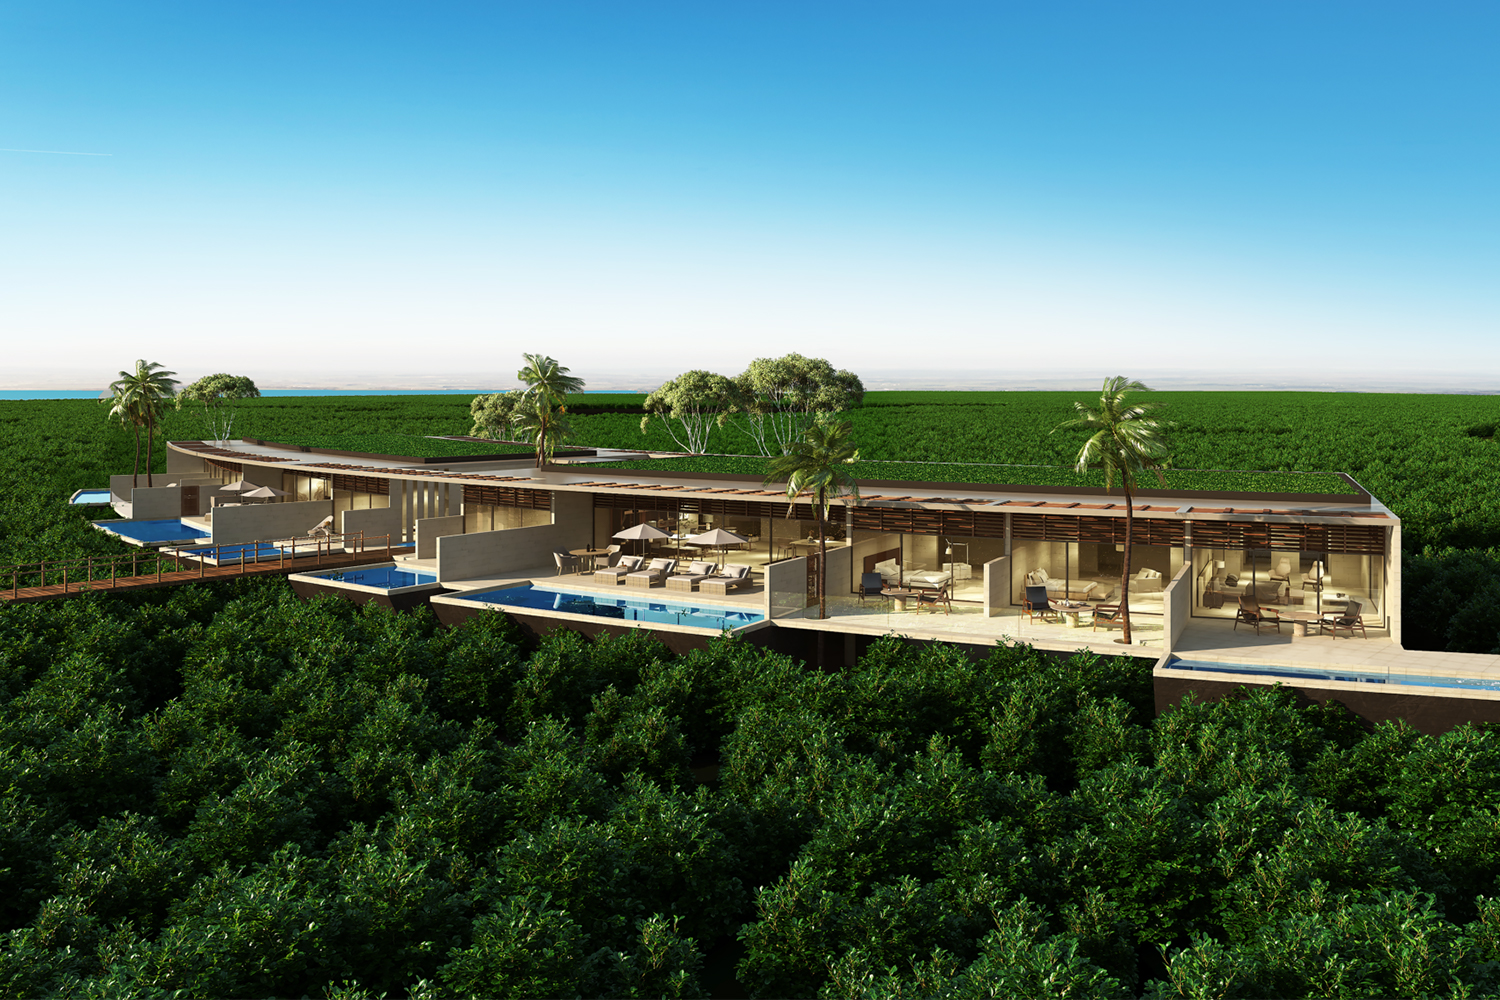 A rendering of the upcoming Riviera Maya Edition at Kanai, a resort that's expected to open in late 2022